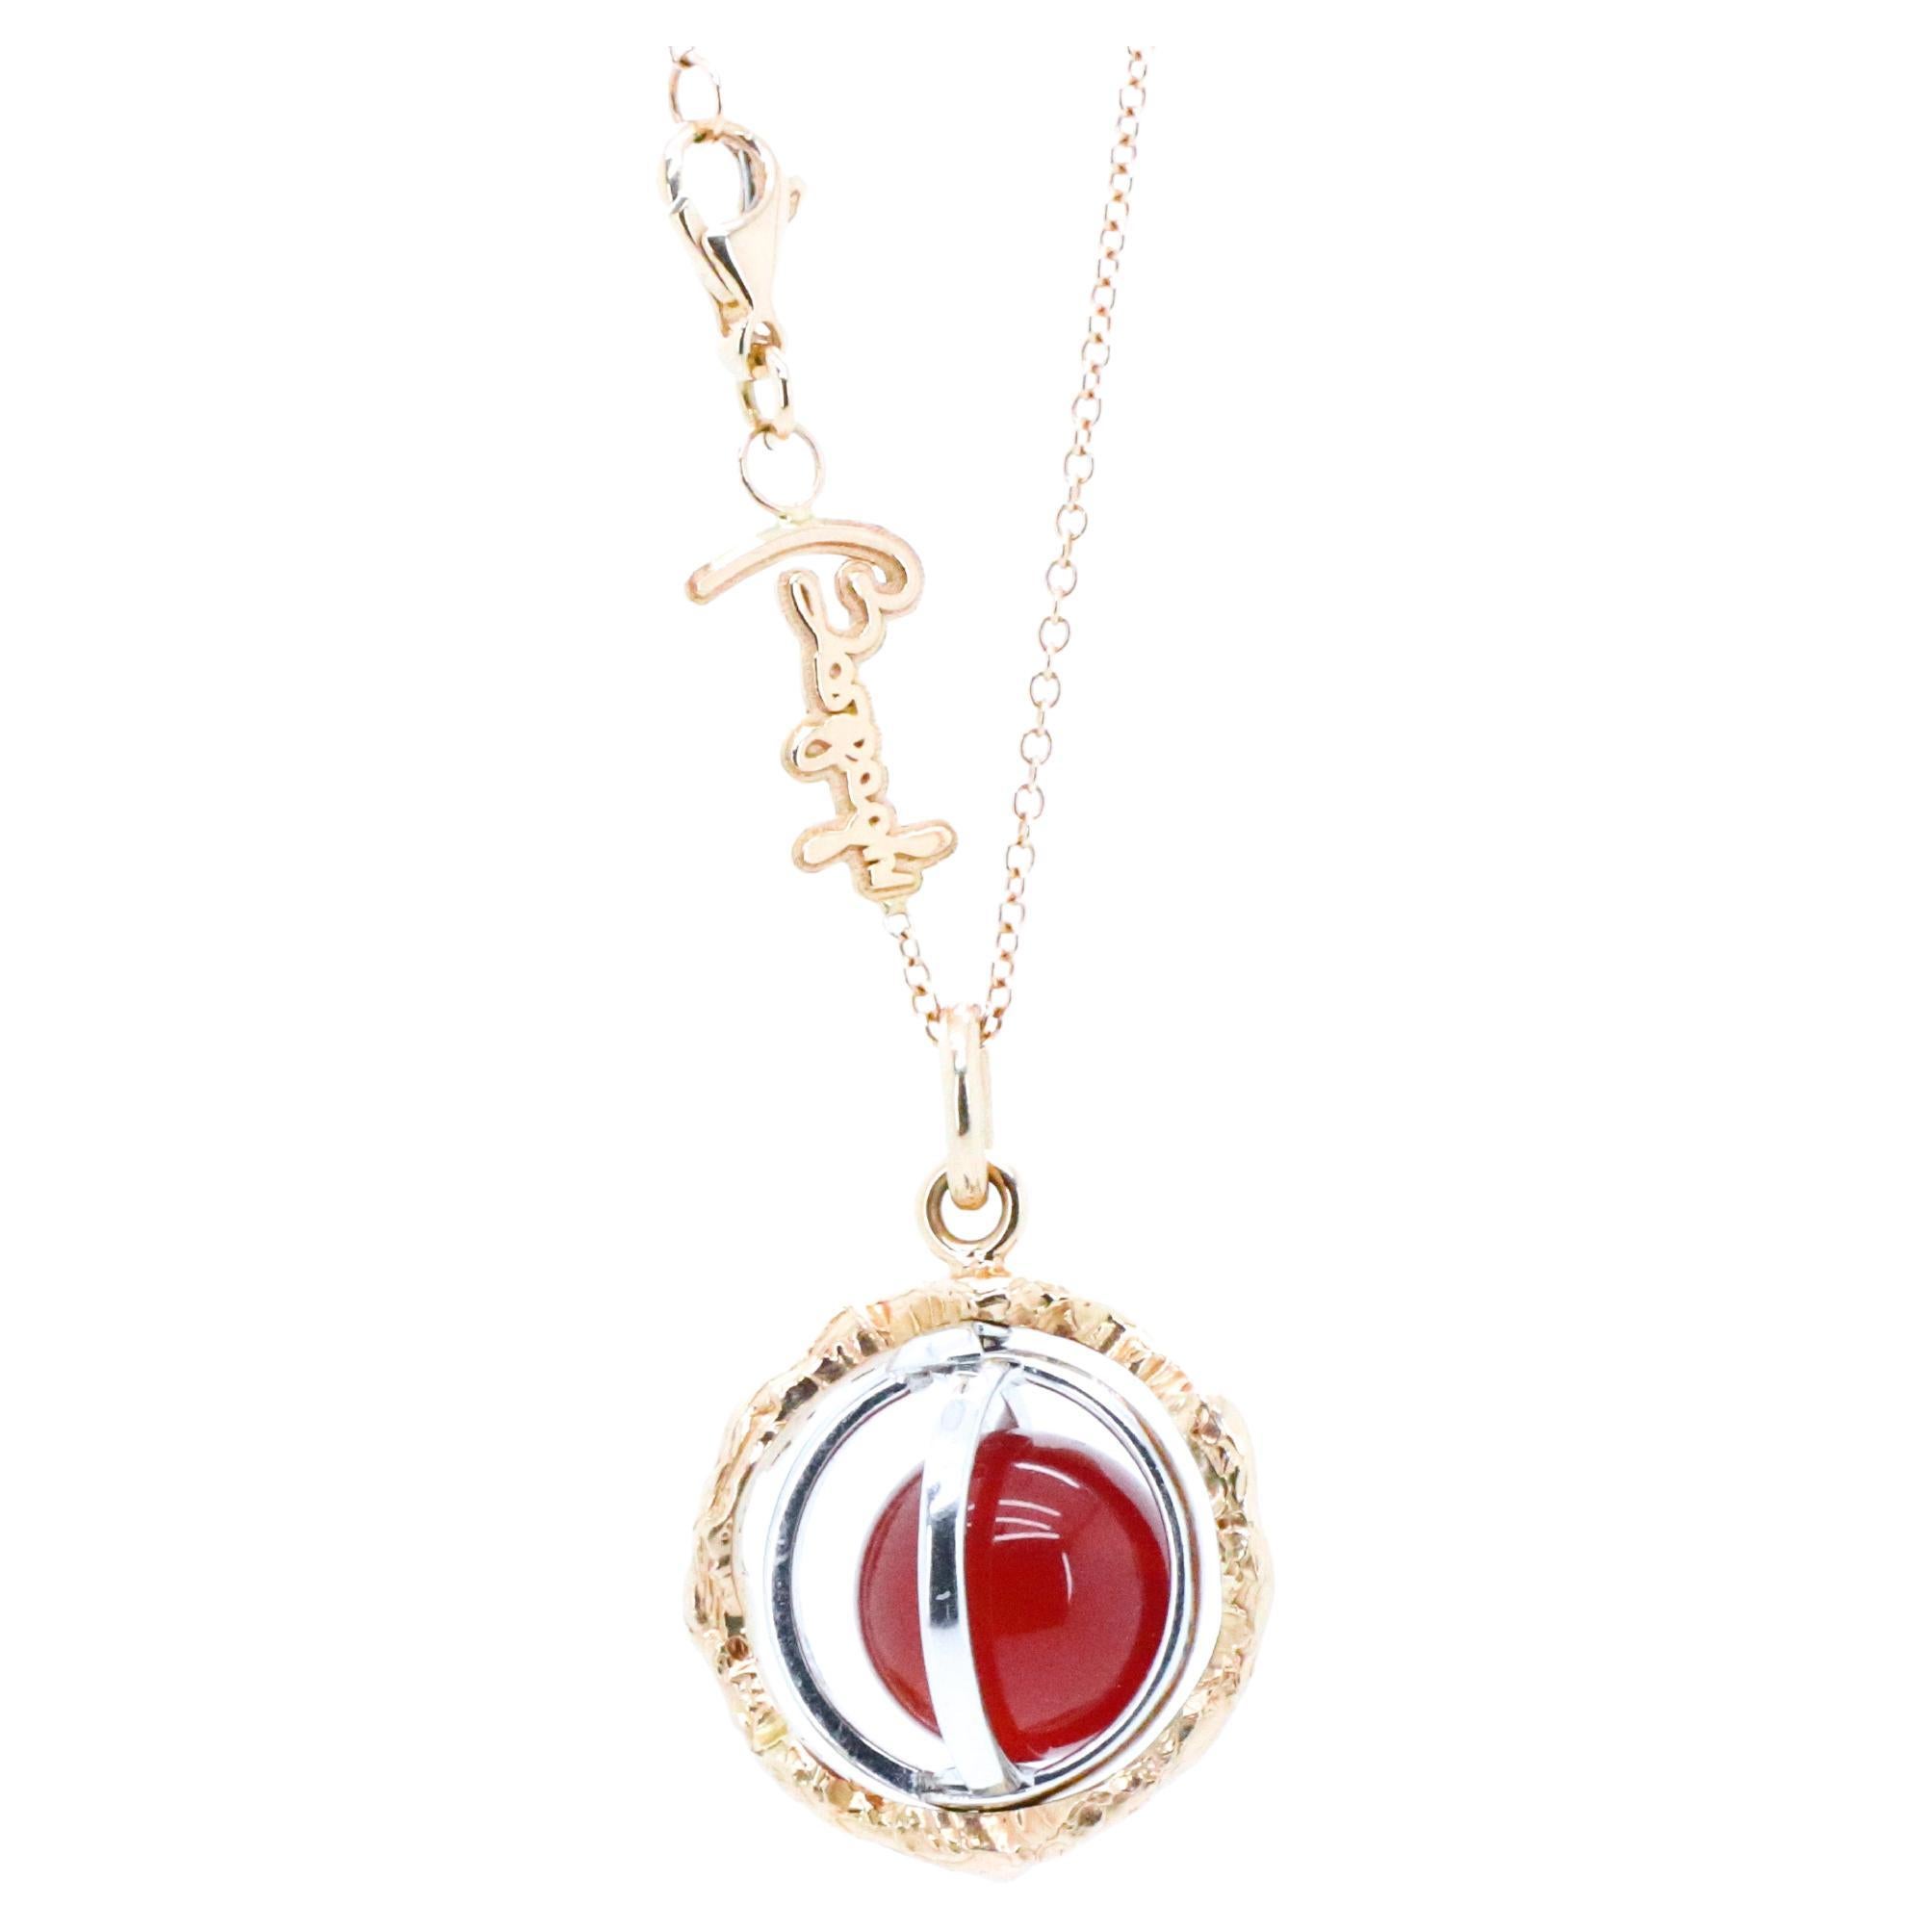 18k Gold Made in Italy Carnelian Changeable Gem Revolving Loops Essence Necklace.
Experience the Wellbeing of Sound and Gemstones with the Sonoro Pendant Necklace.
Unlock Your Divine Potential with the Sonoro pendant. 
Gems and metal are